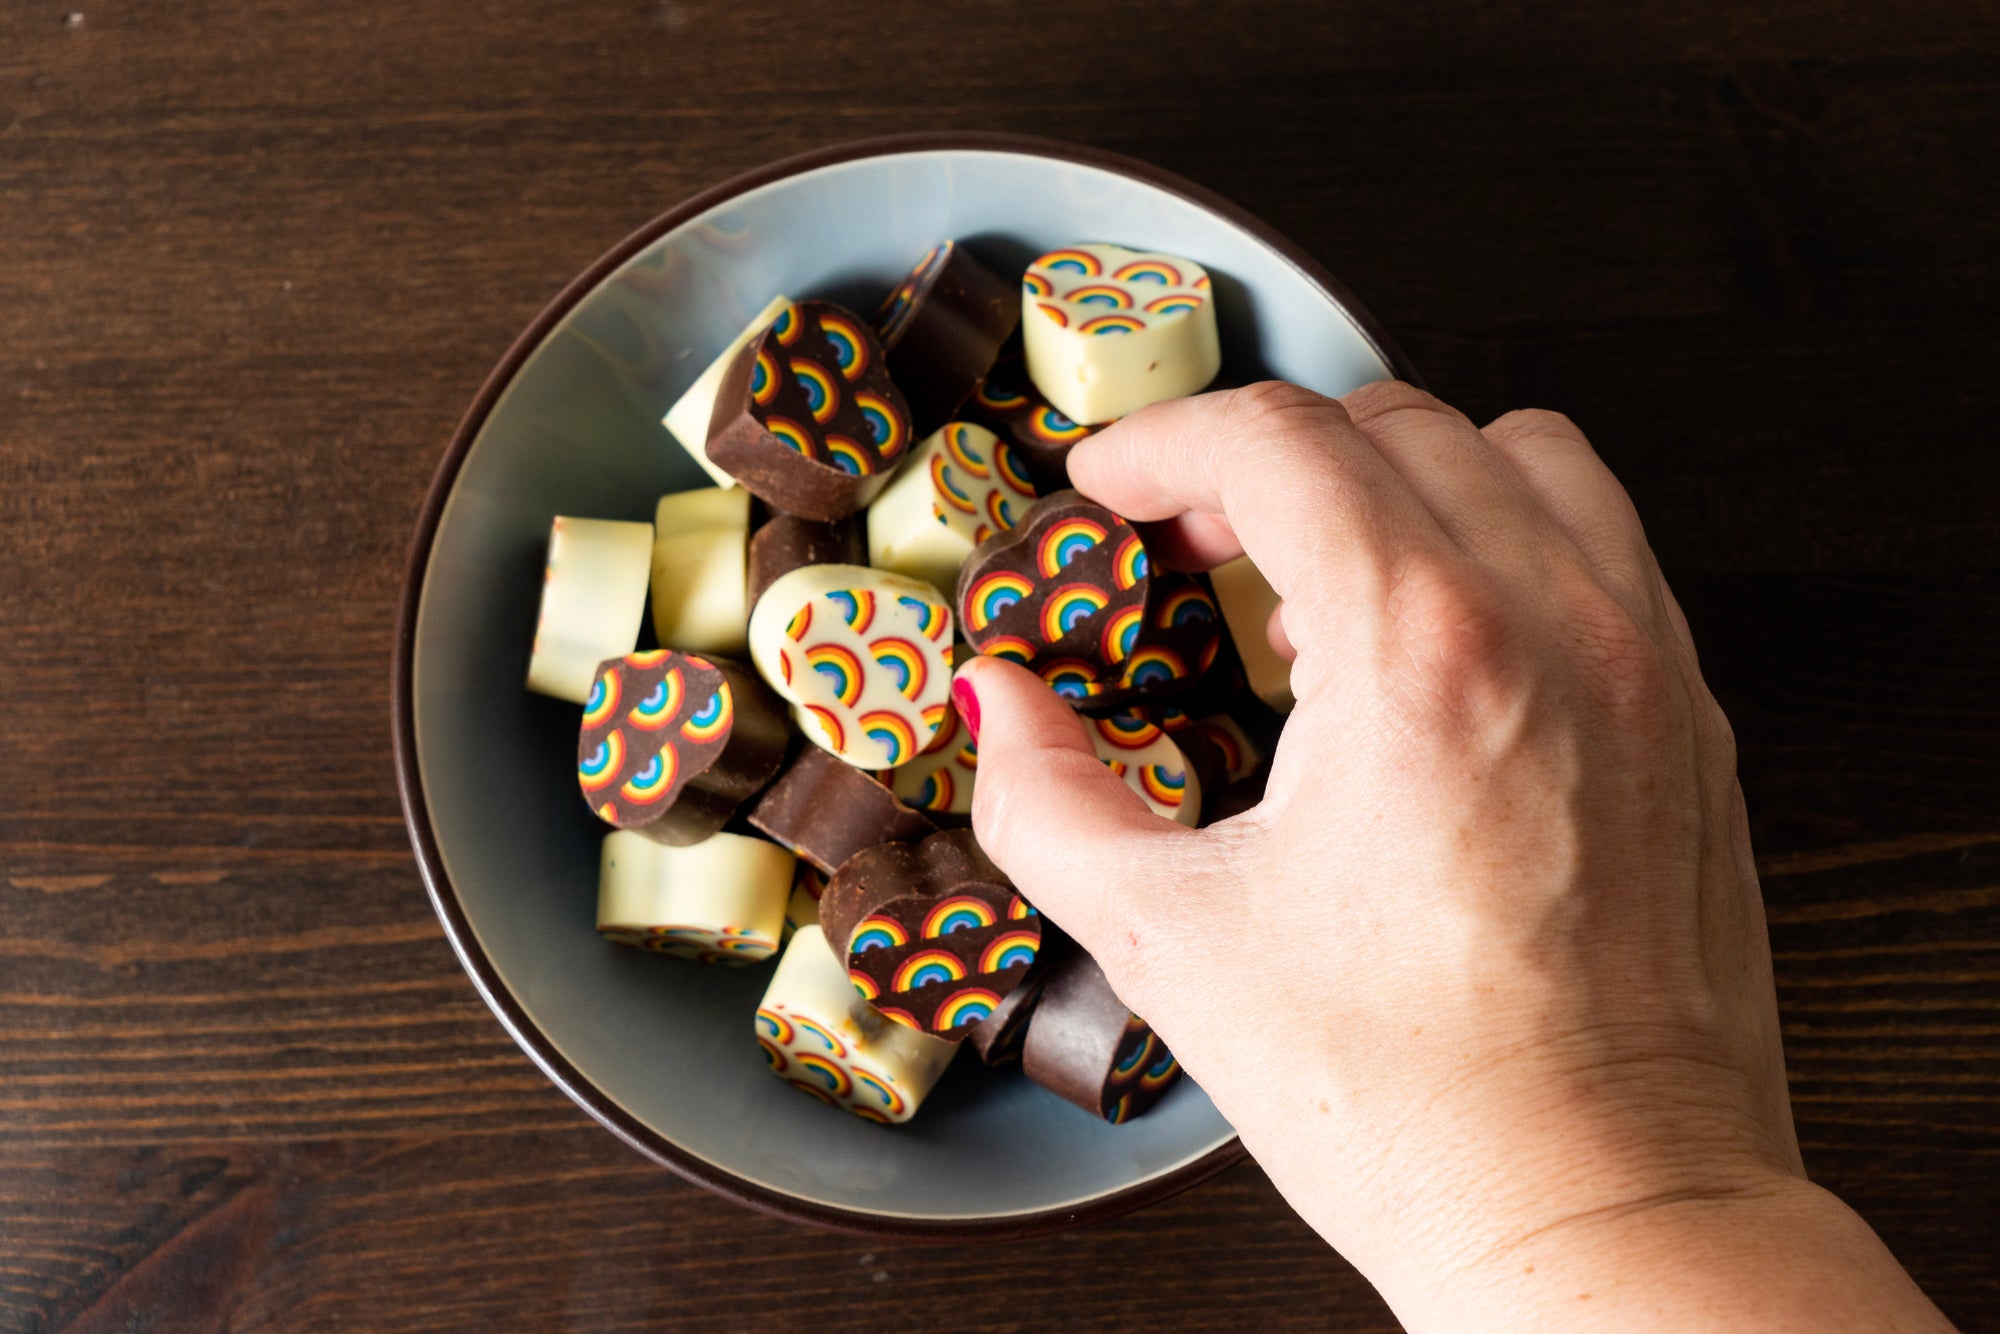 Rainbow Bonbons: Dark &amp; White Chocolate with Dulce de Leche Wooden Table Baking Co.